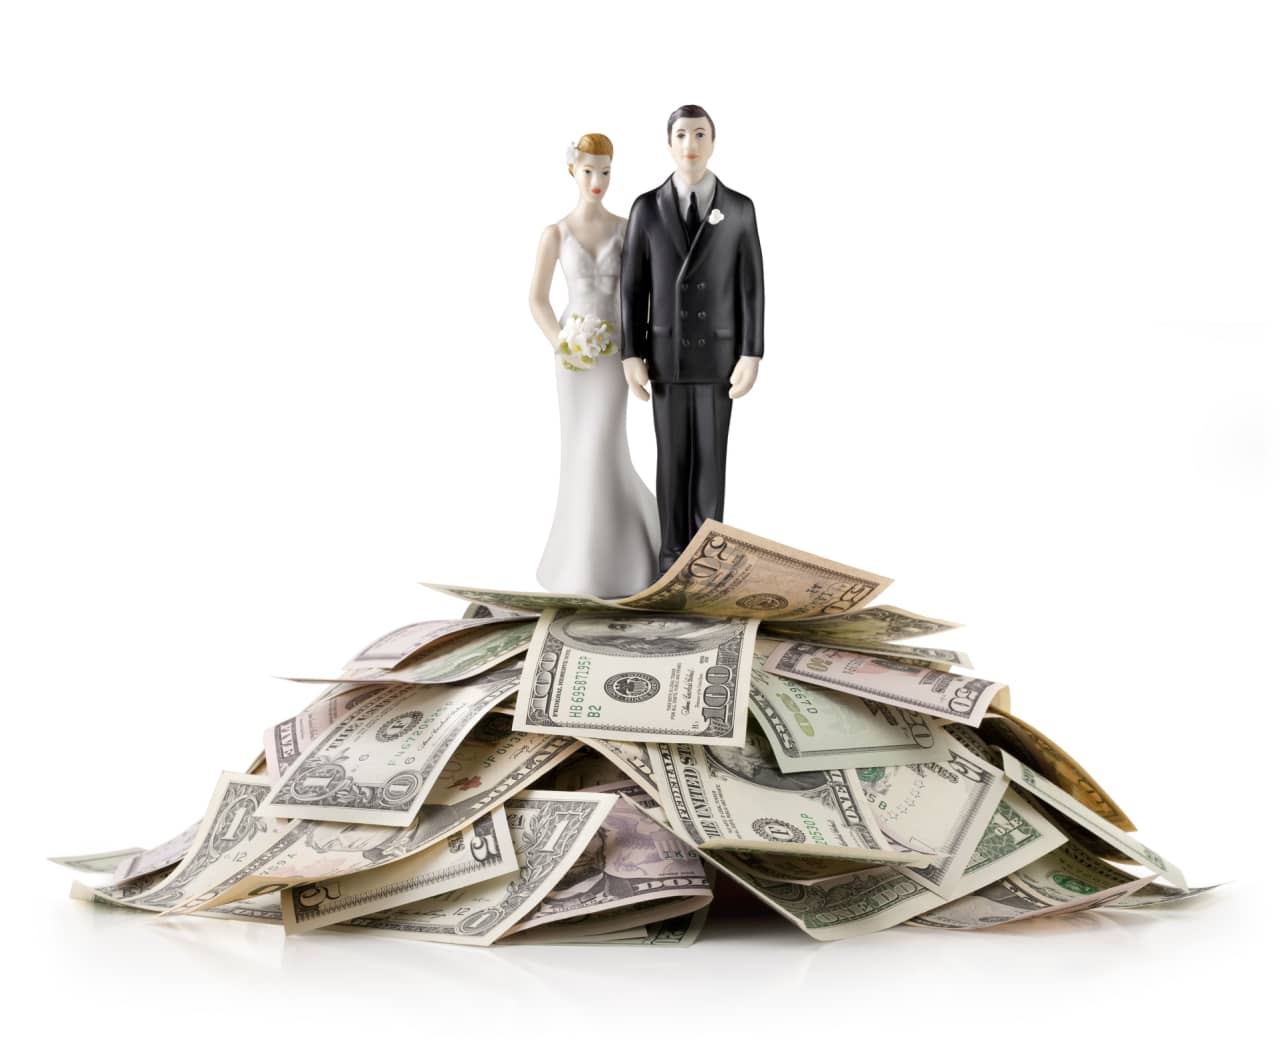 Engaged couples spend a fortune on weddings. They’d be happier investing in their marriage.